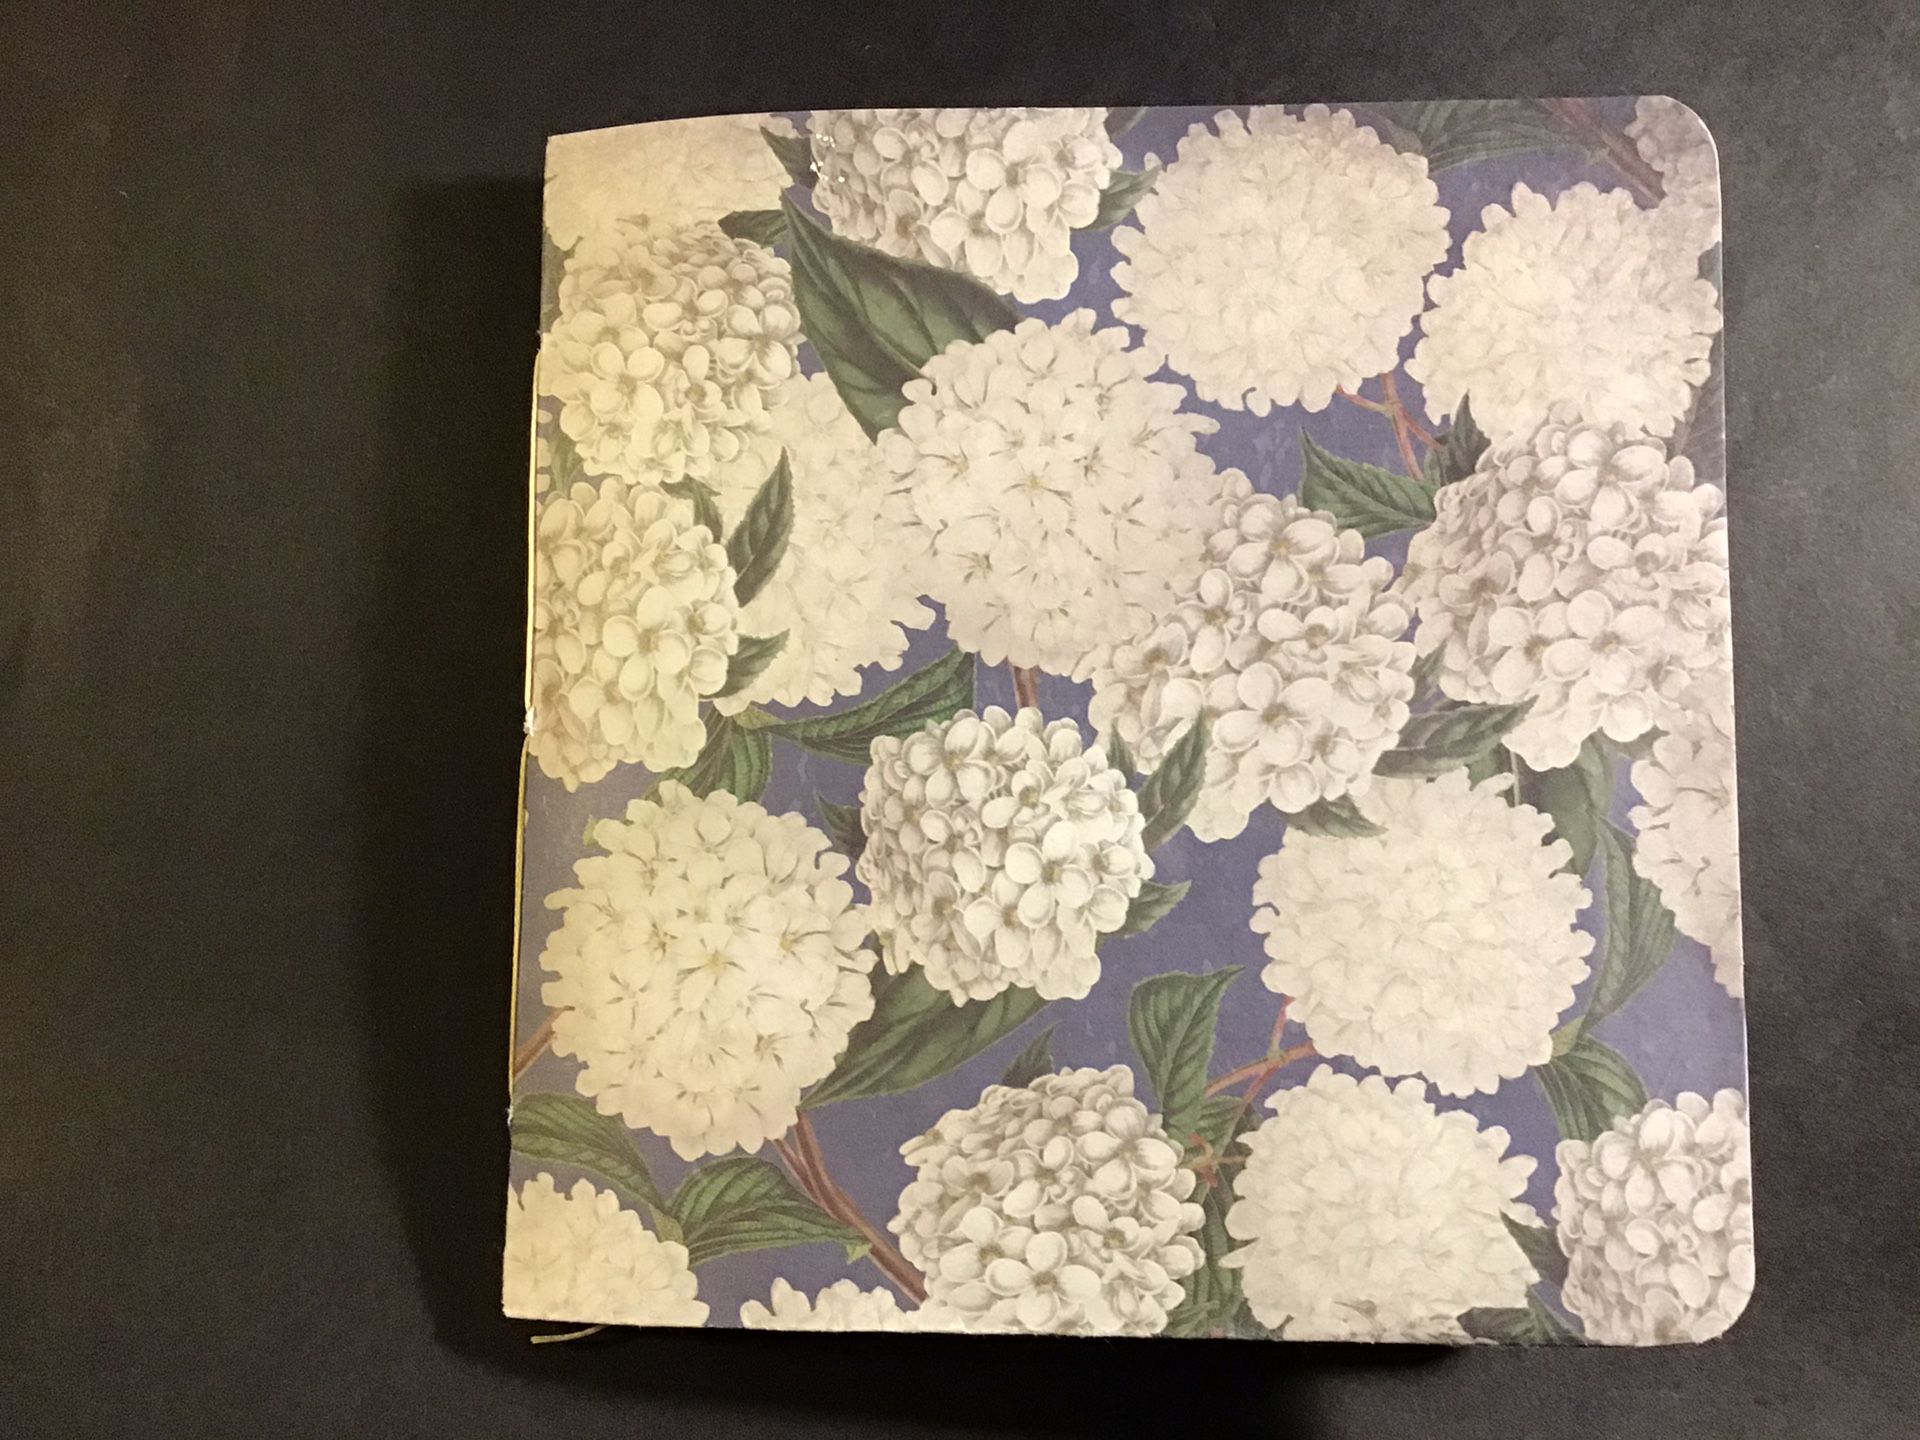 New handmade journal 6”x6” w/assortment of paper. 64 pages.